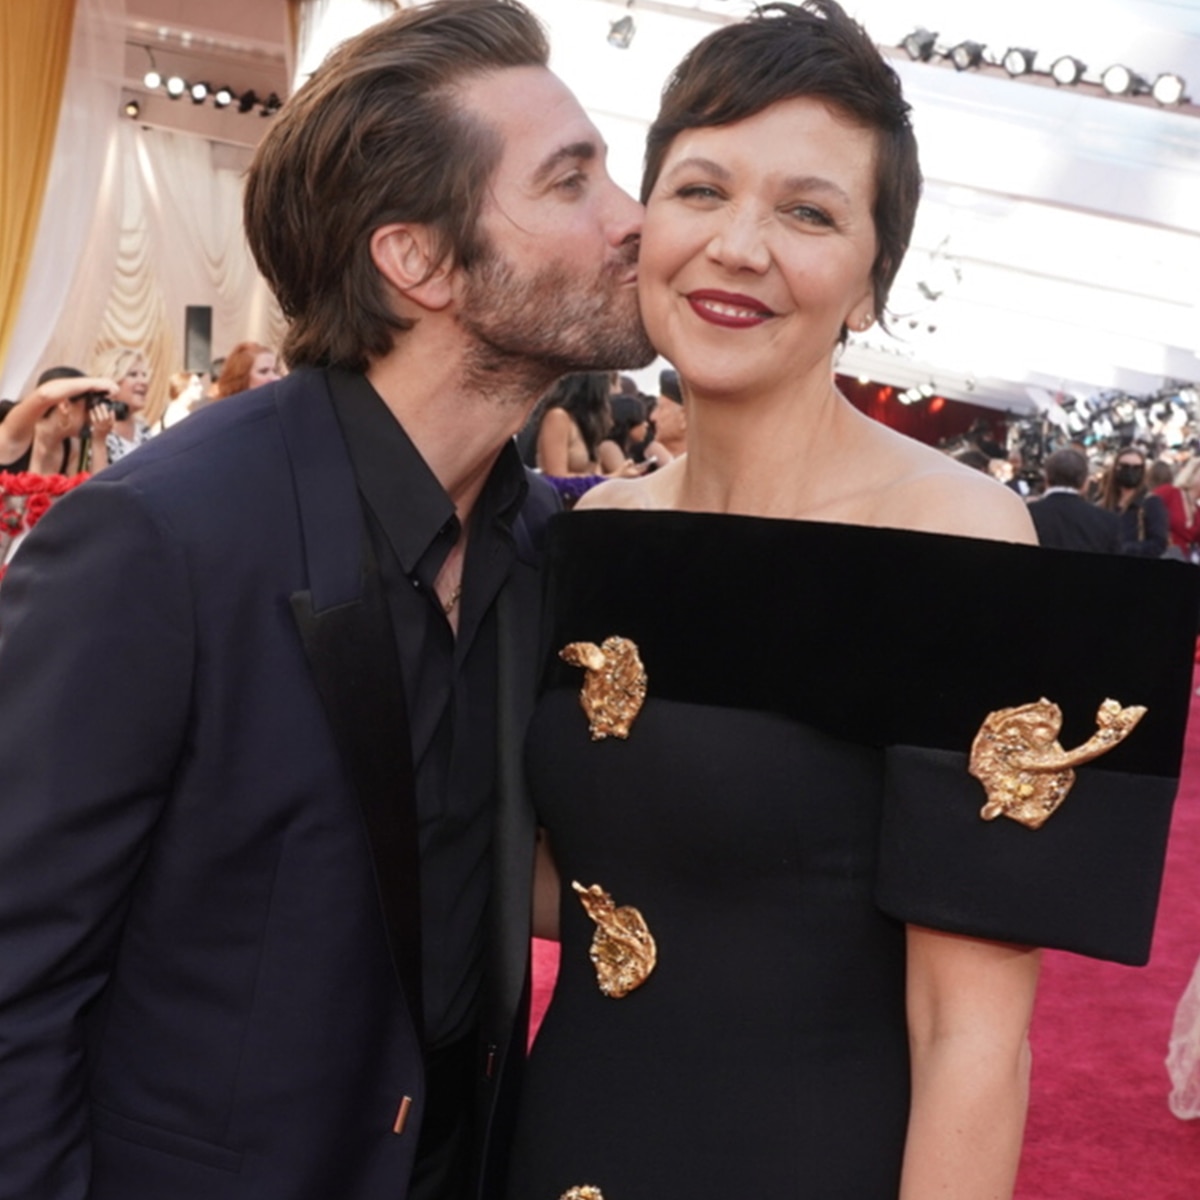 Jake Gyllenhaal and Maggie Gyllenhaal React After Amy Schumer Calls Them a “Couple” at Oscars 2022